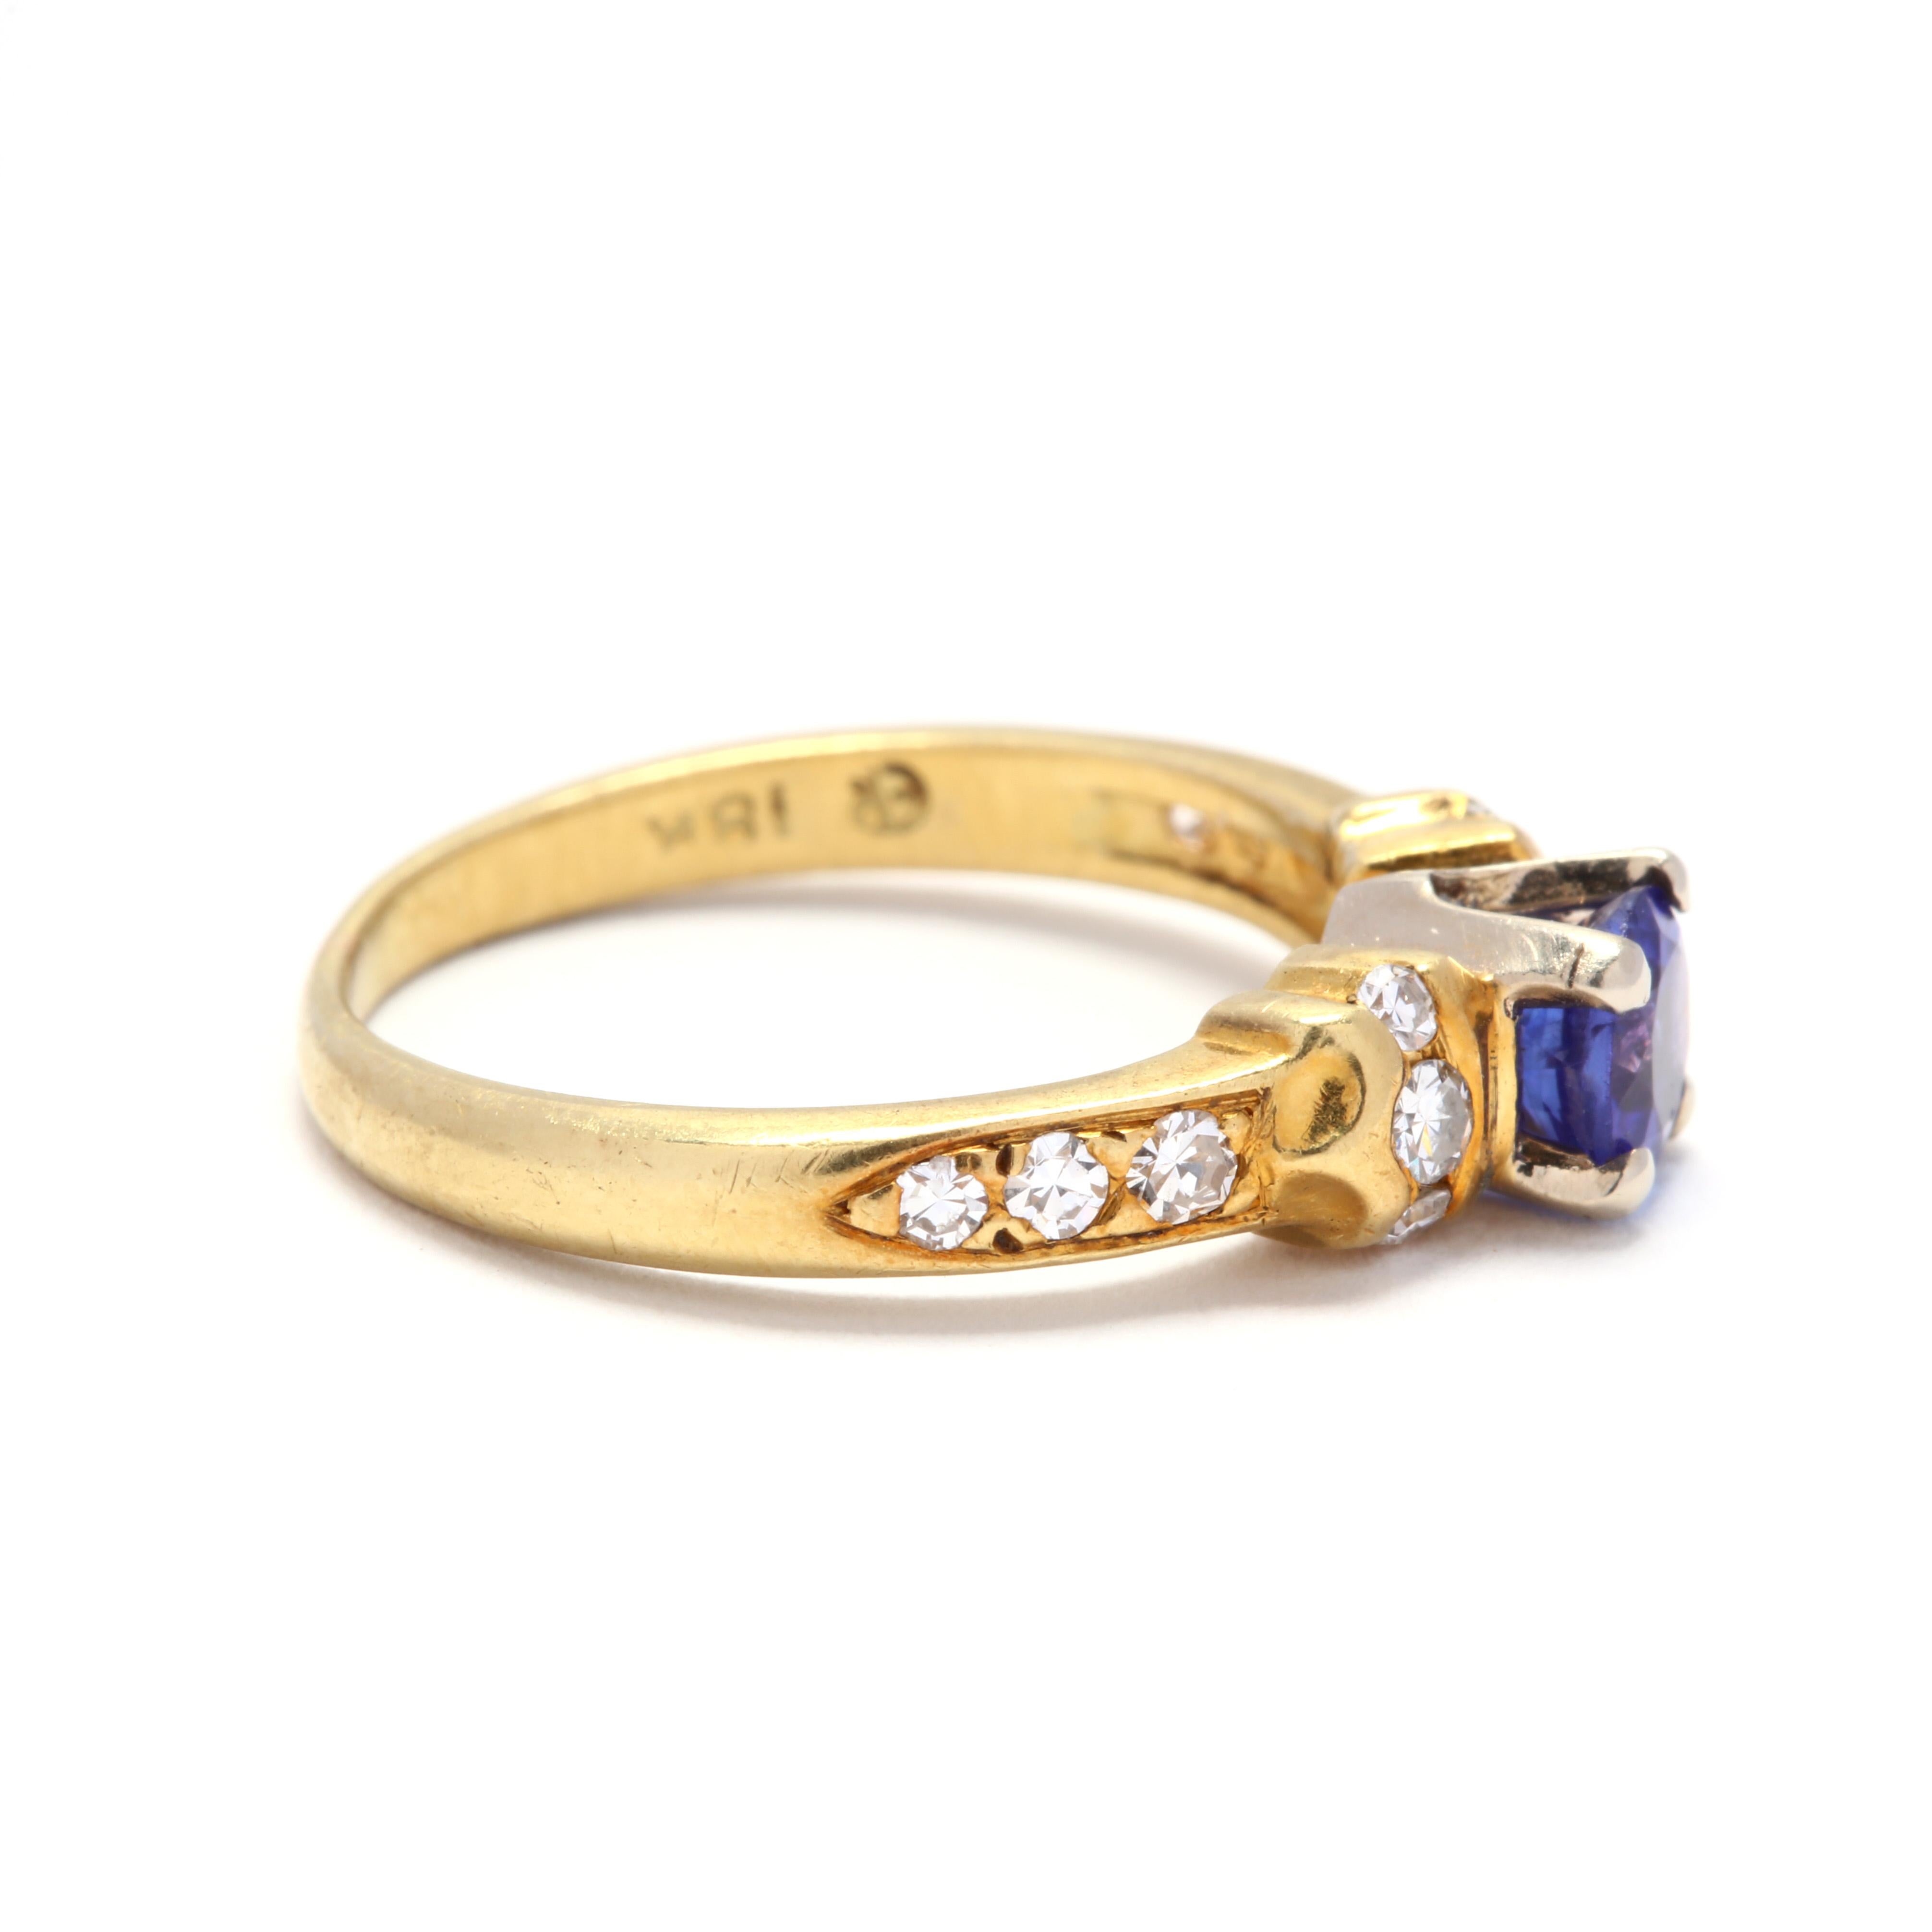 An 18 karat yellow gold, sapphire and diamond ring. Featuring a prong set, round cut sapphire weighing approximately .70 carat with single cut diamonds weighing approximately .25 total carats down the shank.

Stones:
- sapphire, 1 stone
- round